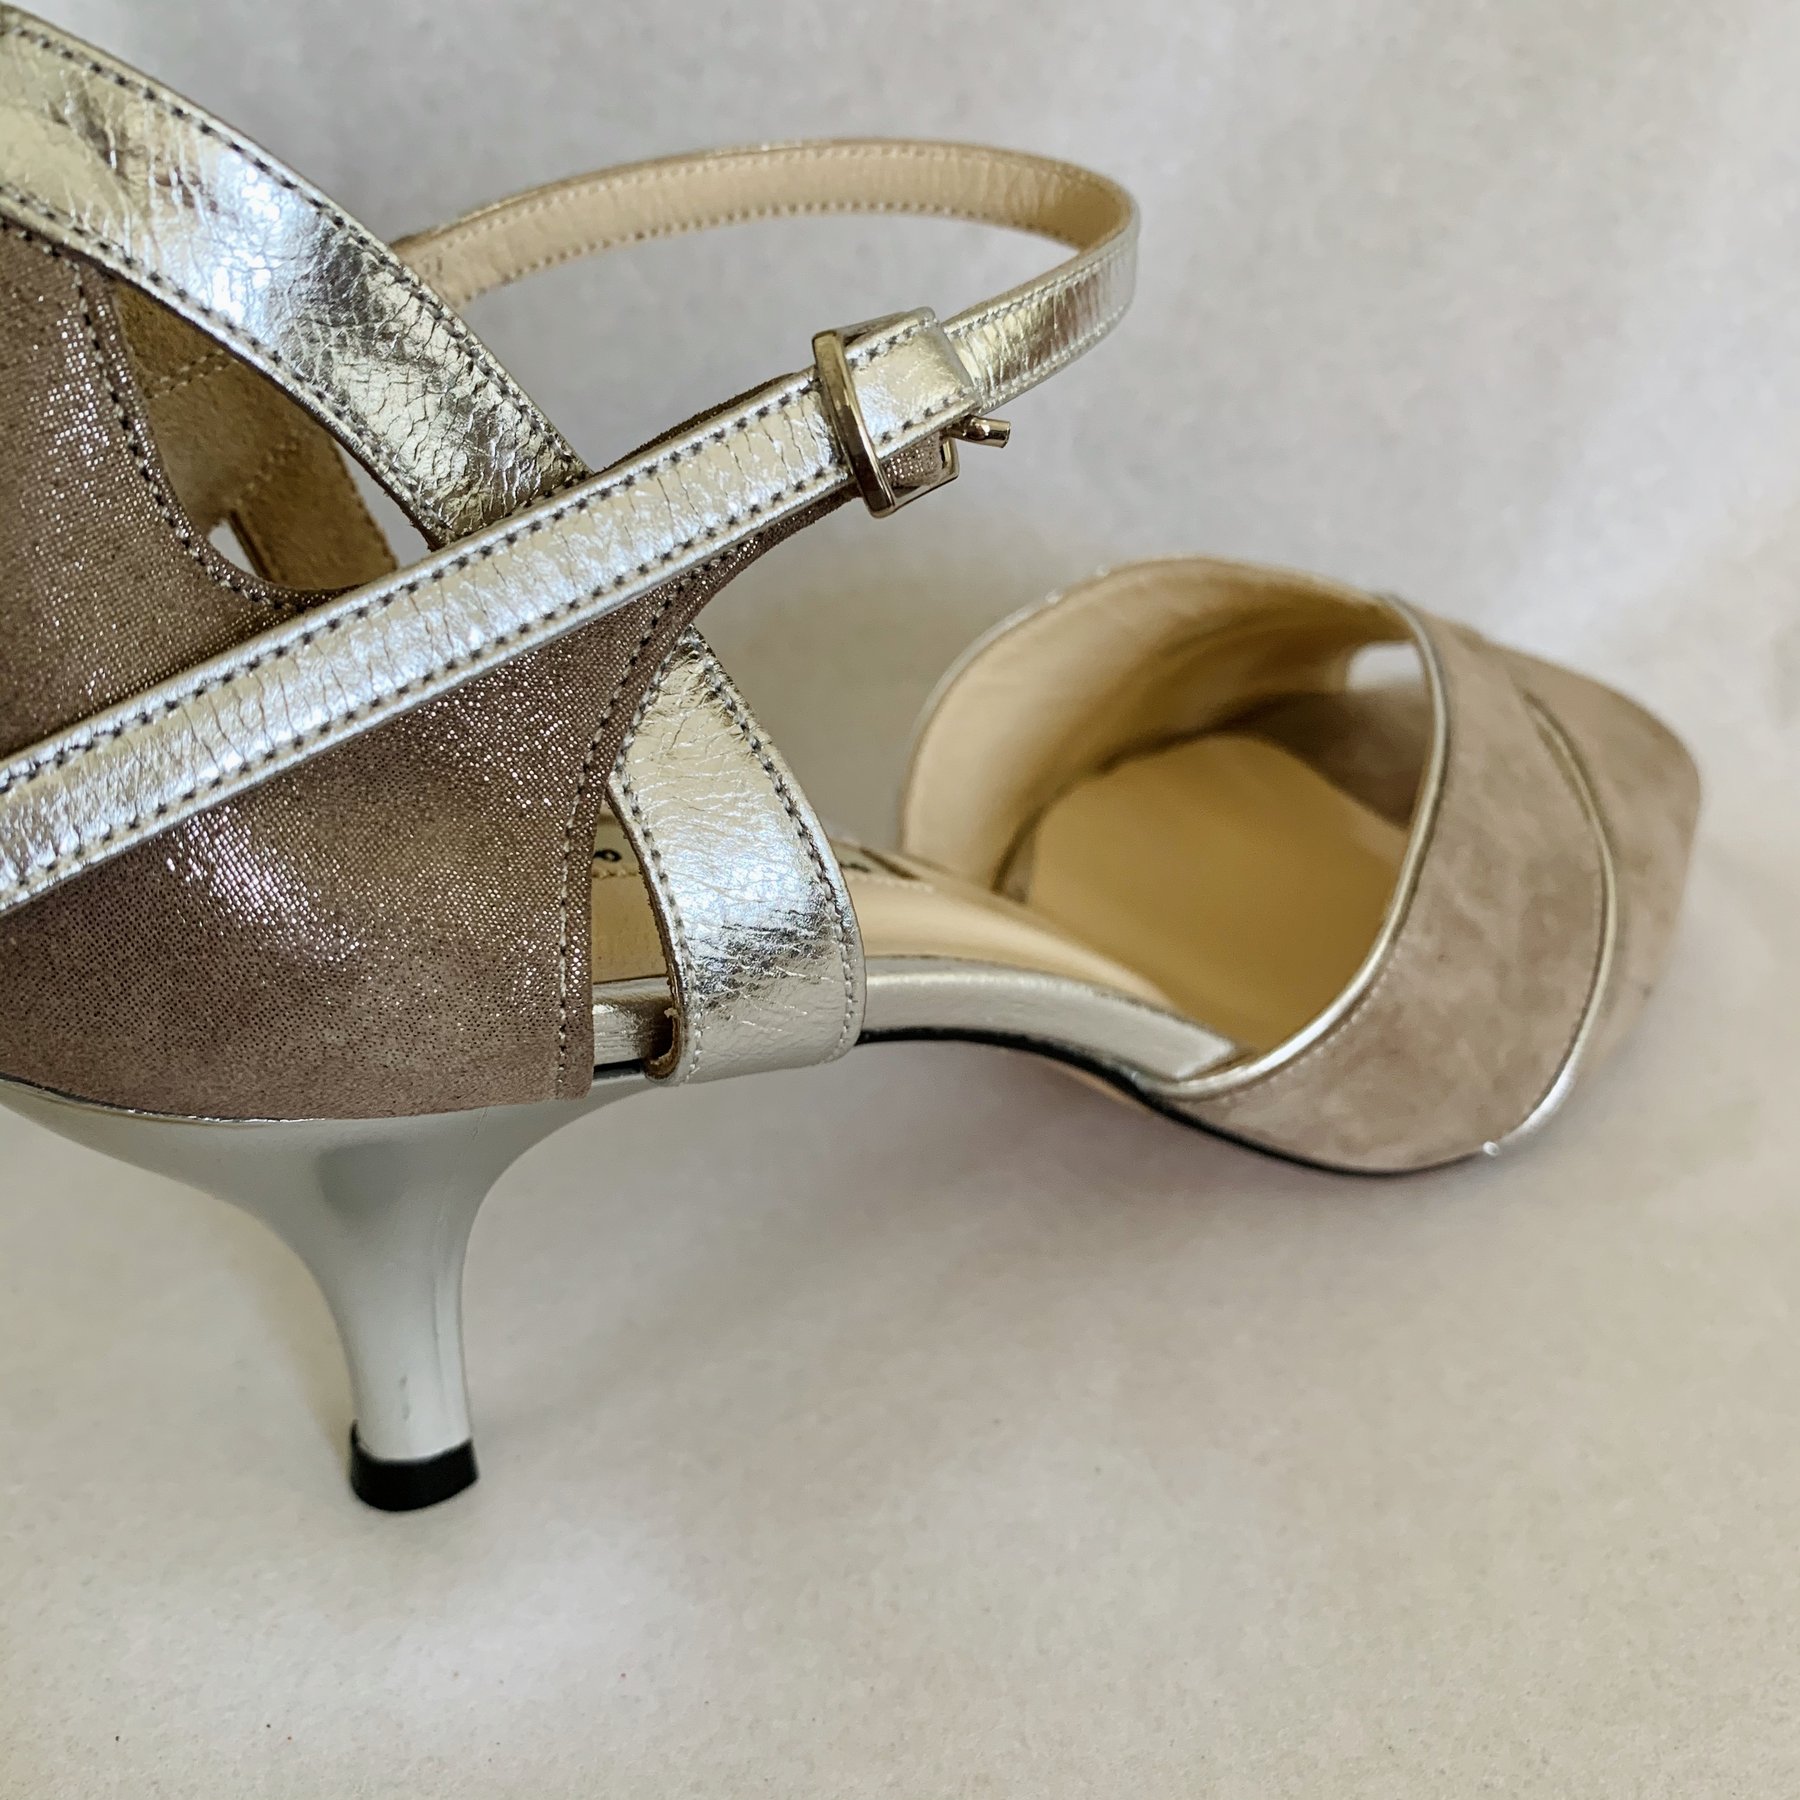 NIce pair of beige shoes - New | Your Dance Market